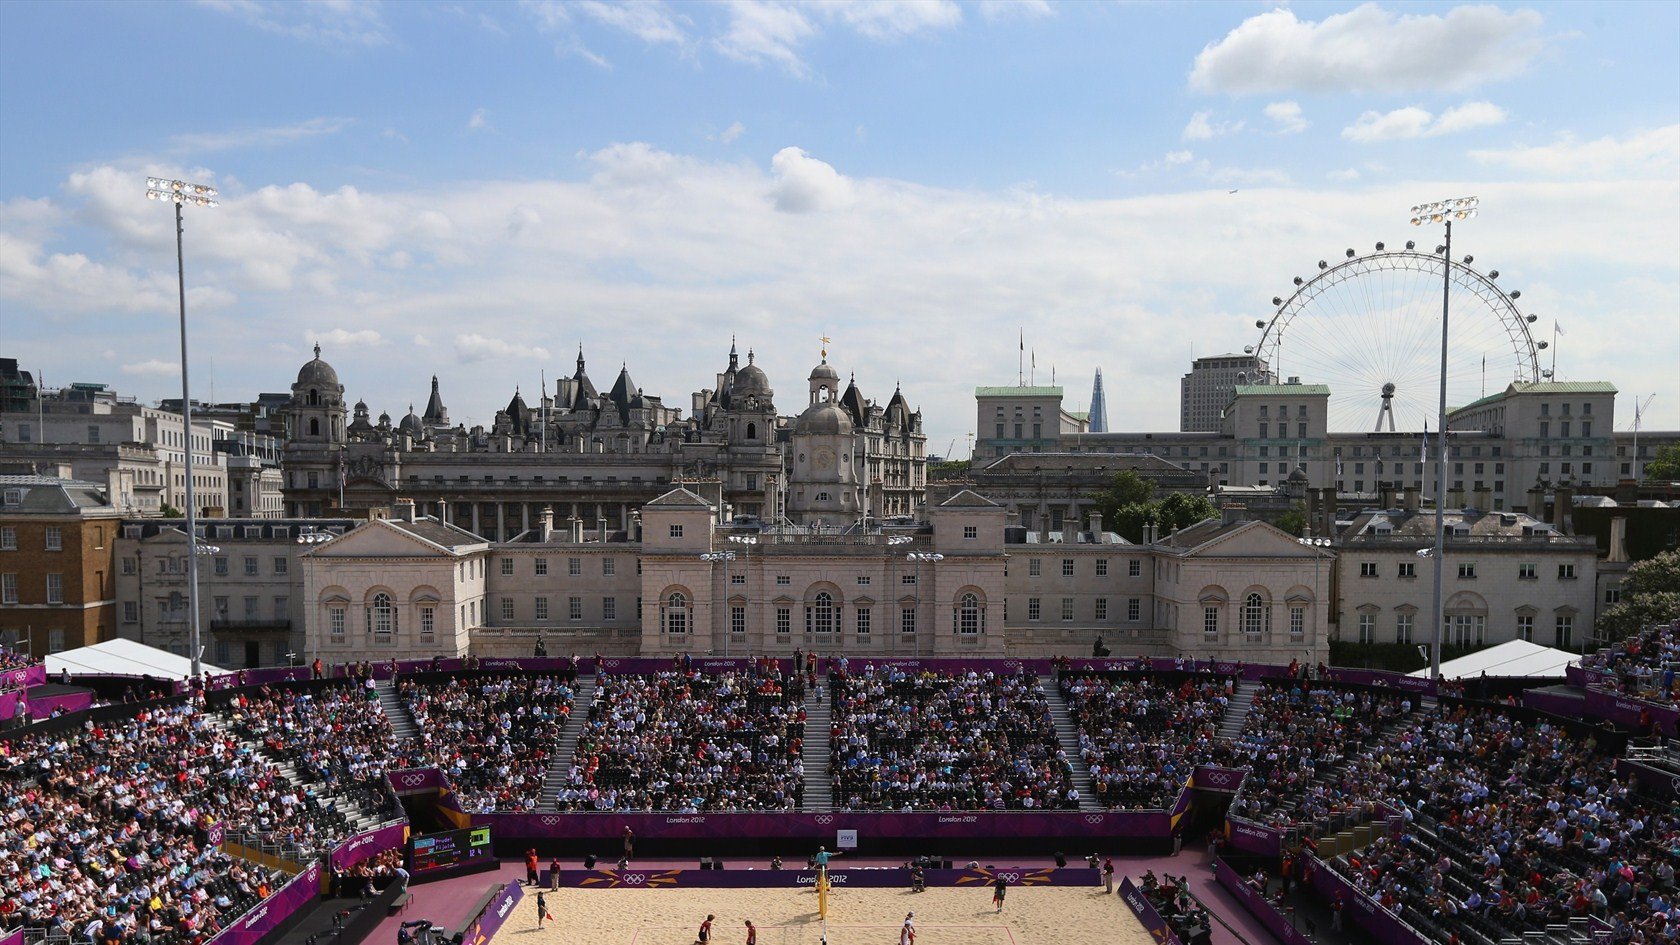 The Horse Guards Parade at the 2012 London Olympics